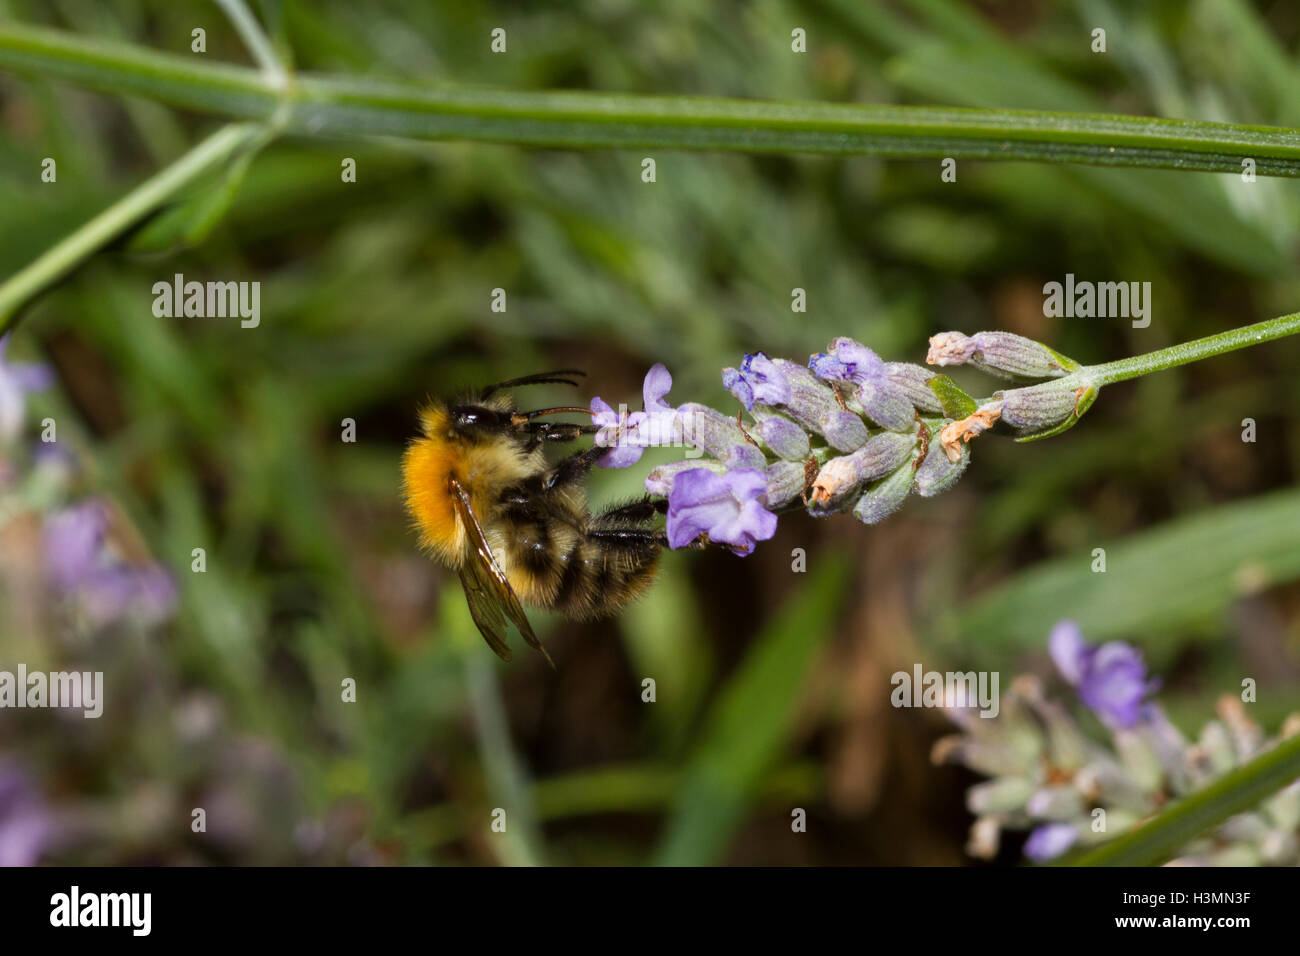 Common carder bee on lavender flower Stock Photo